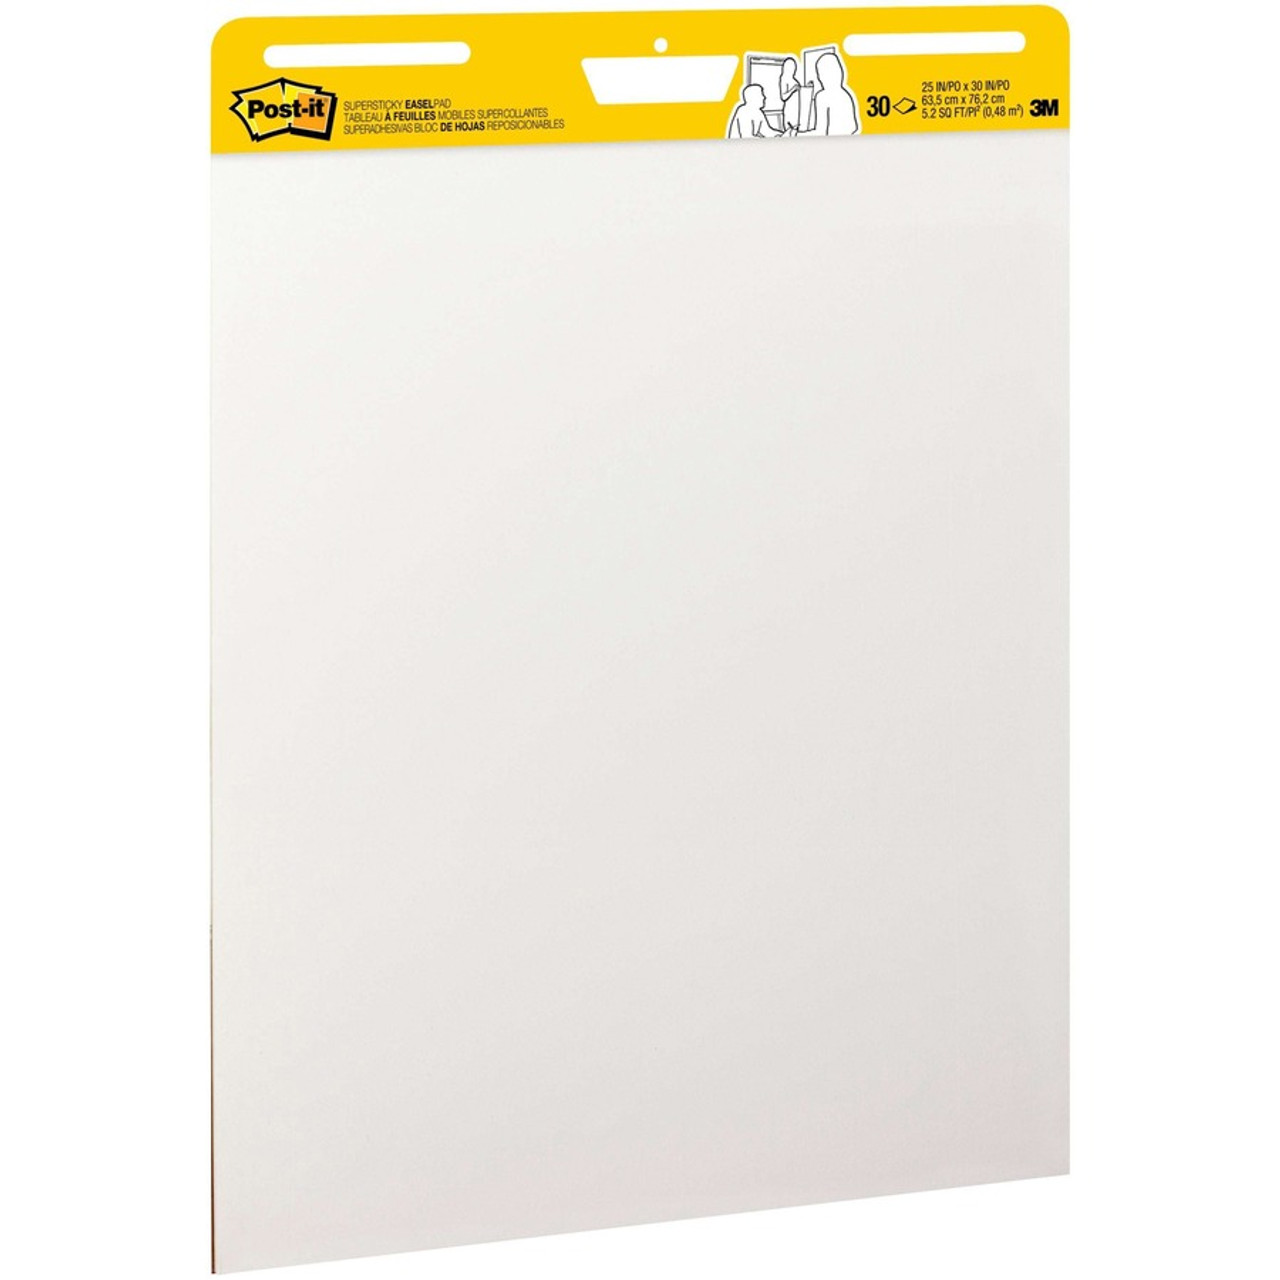 Post-it Super Sticky Wall Easel Pads, 20 x 23, White Paper, Pack Of 4  Pads